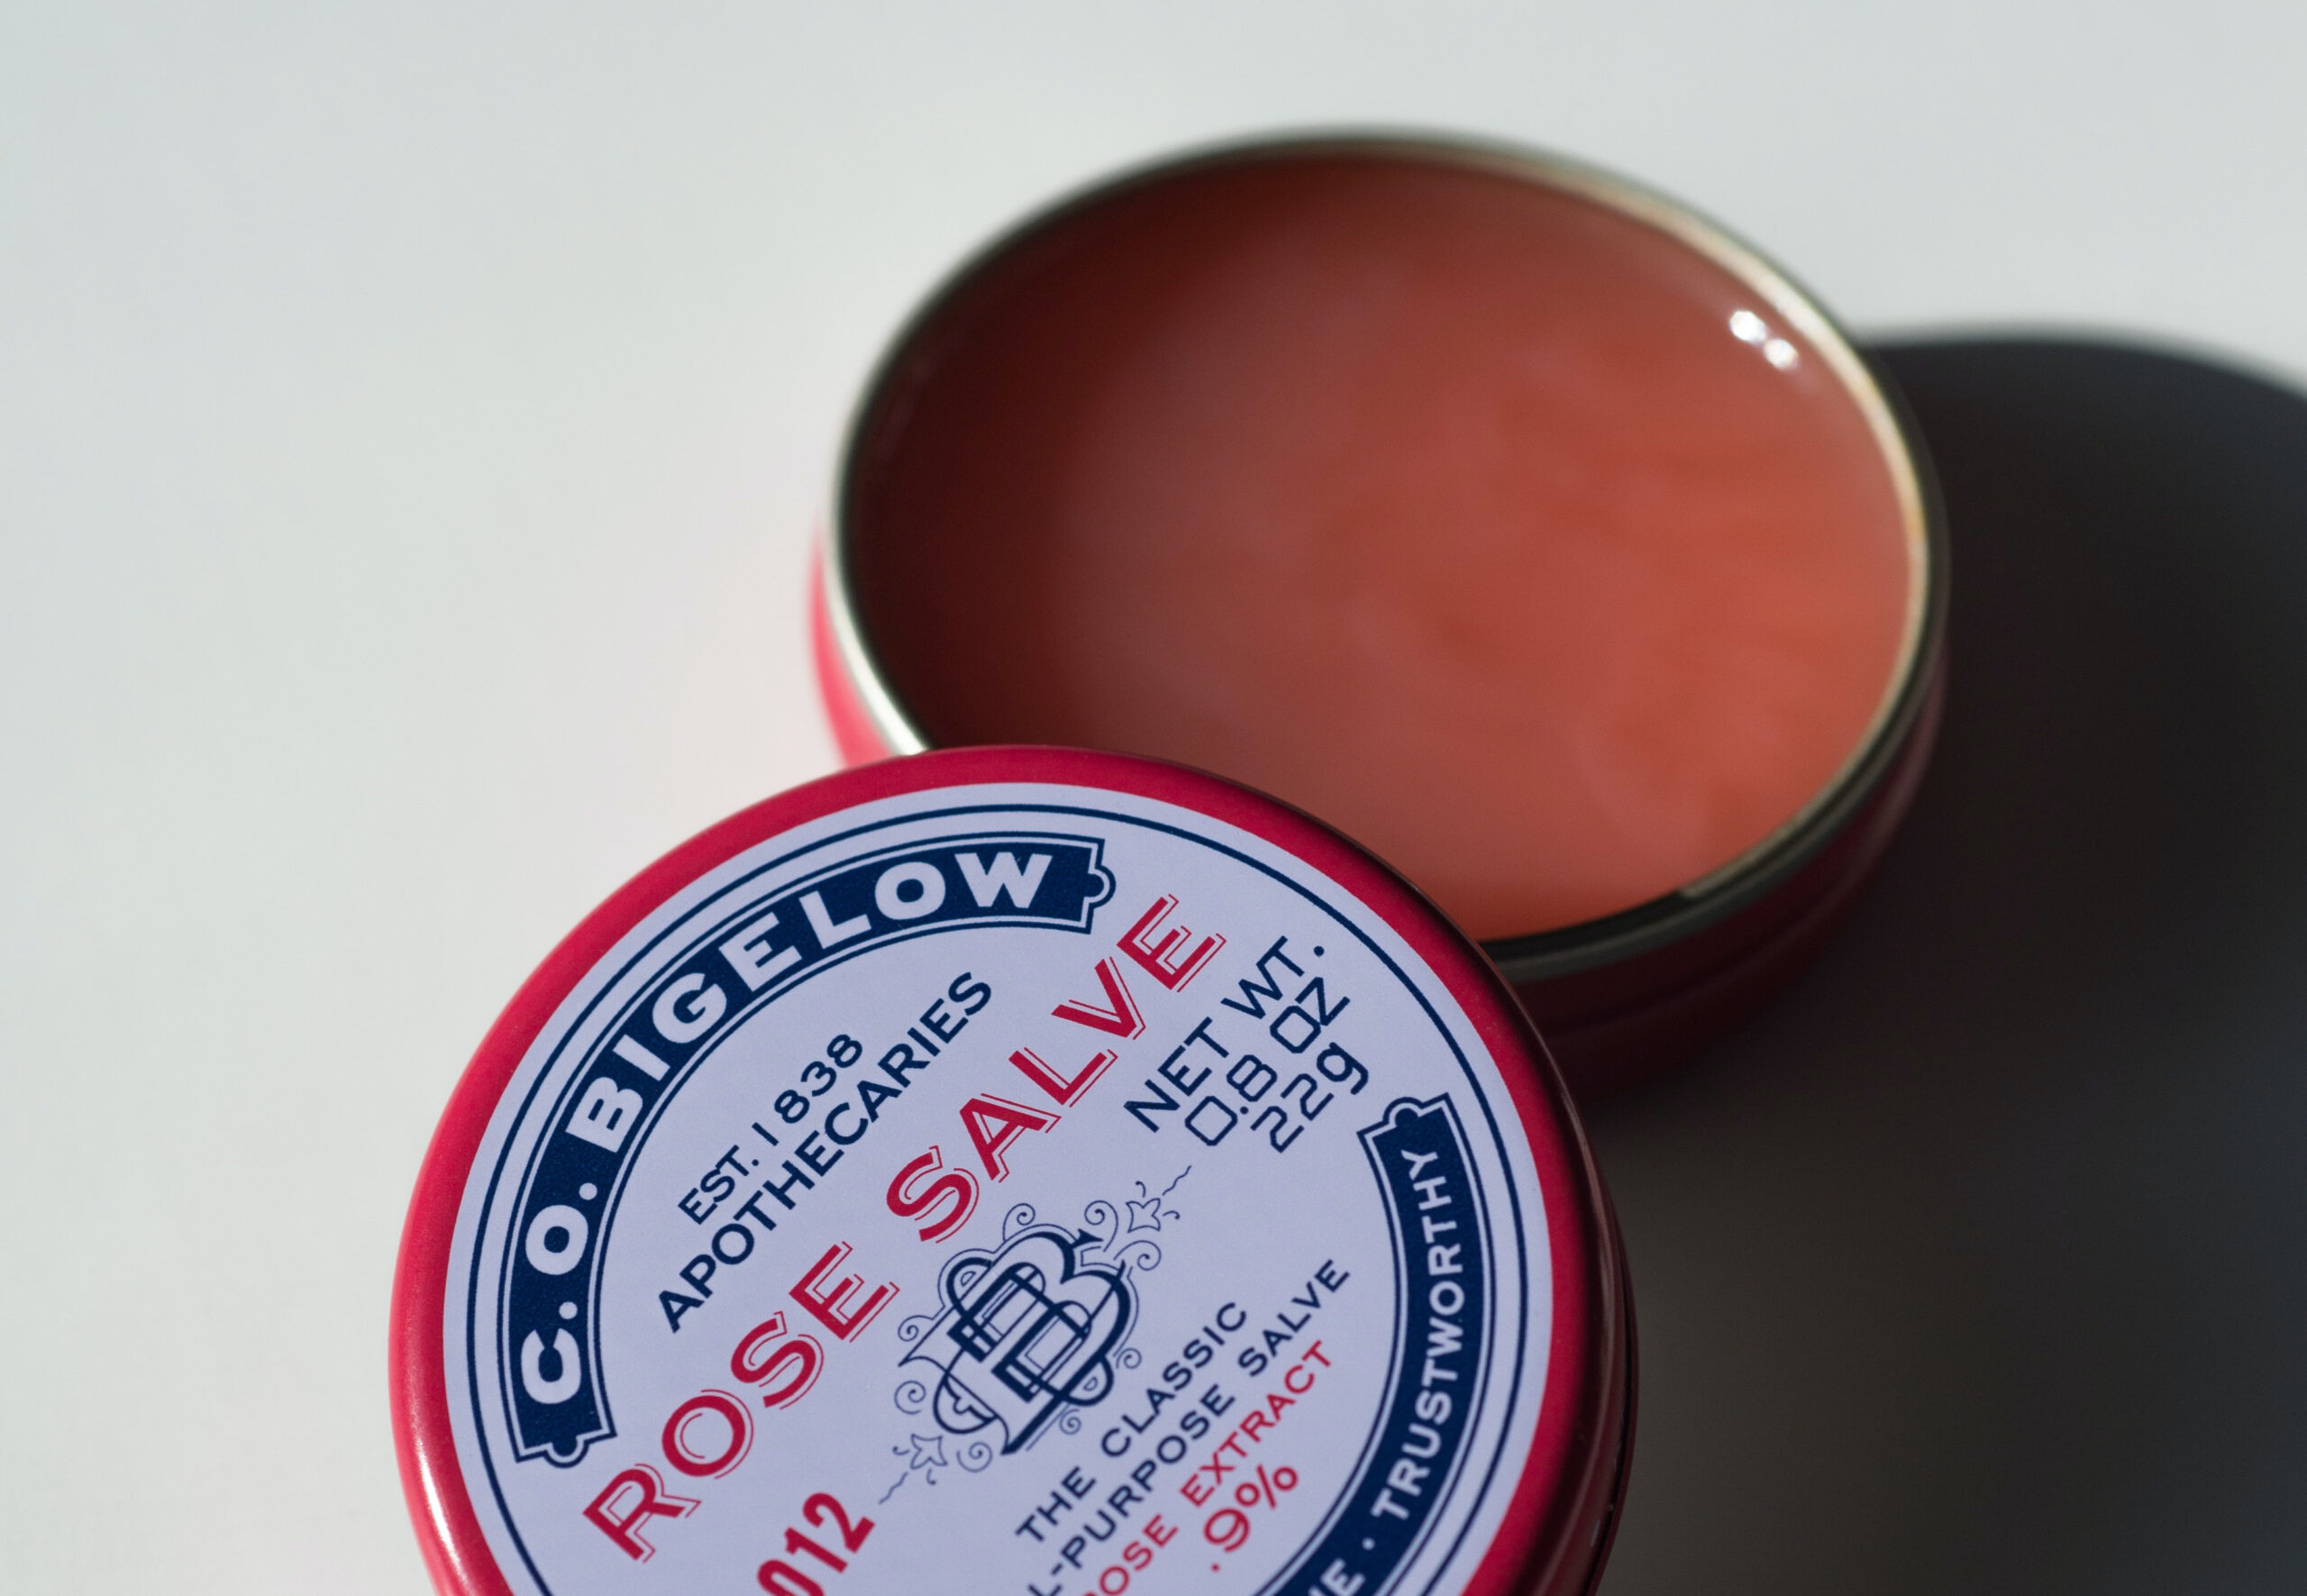 Lip balm is an ideal treatment for minor shaving cuts